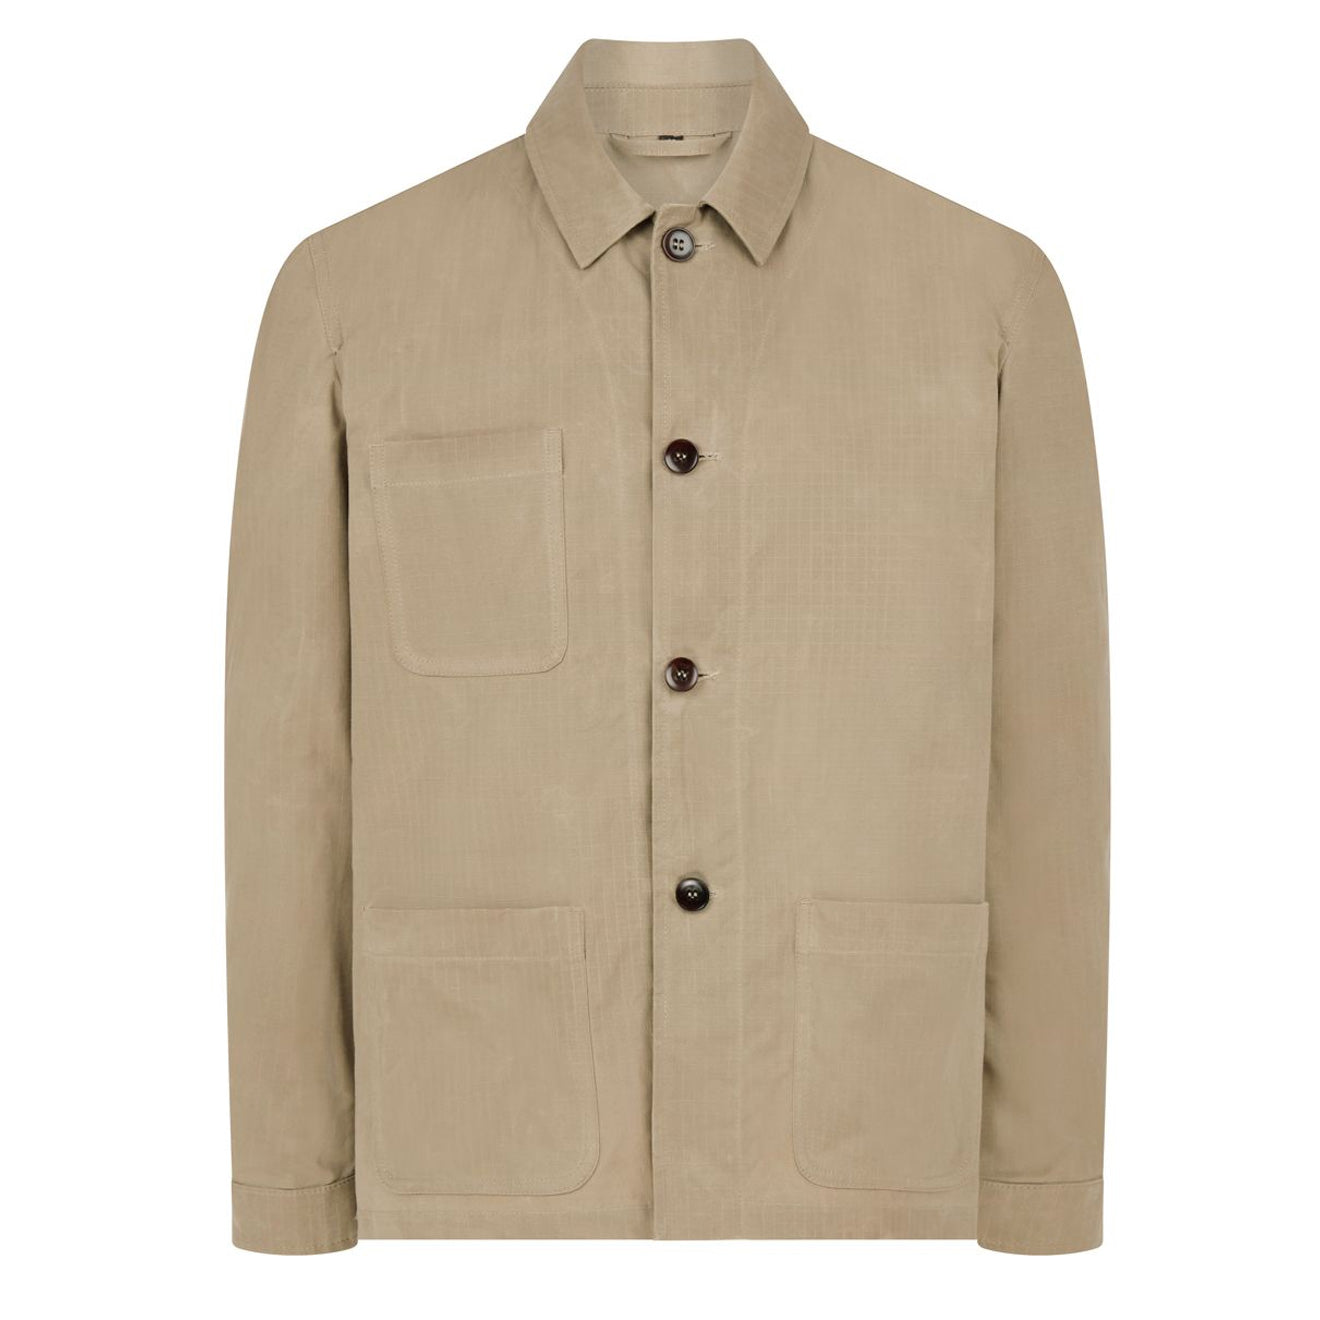 James Purdey Ripstop Chore Jacket Beige | The Sporting Lodge